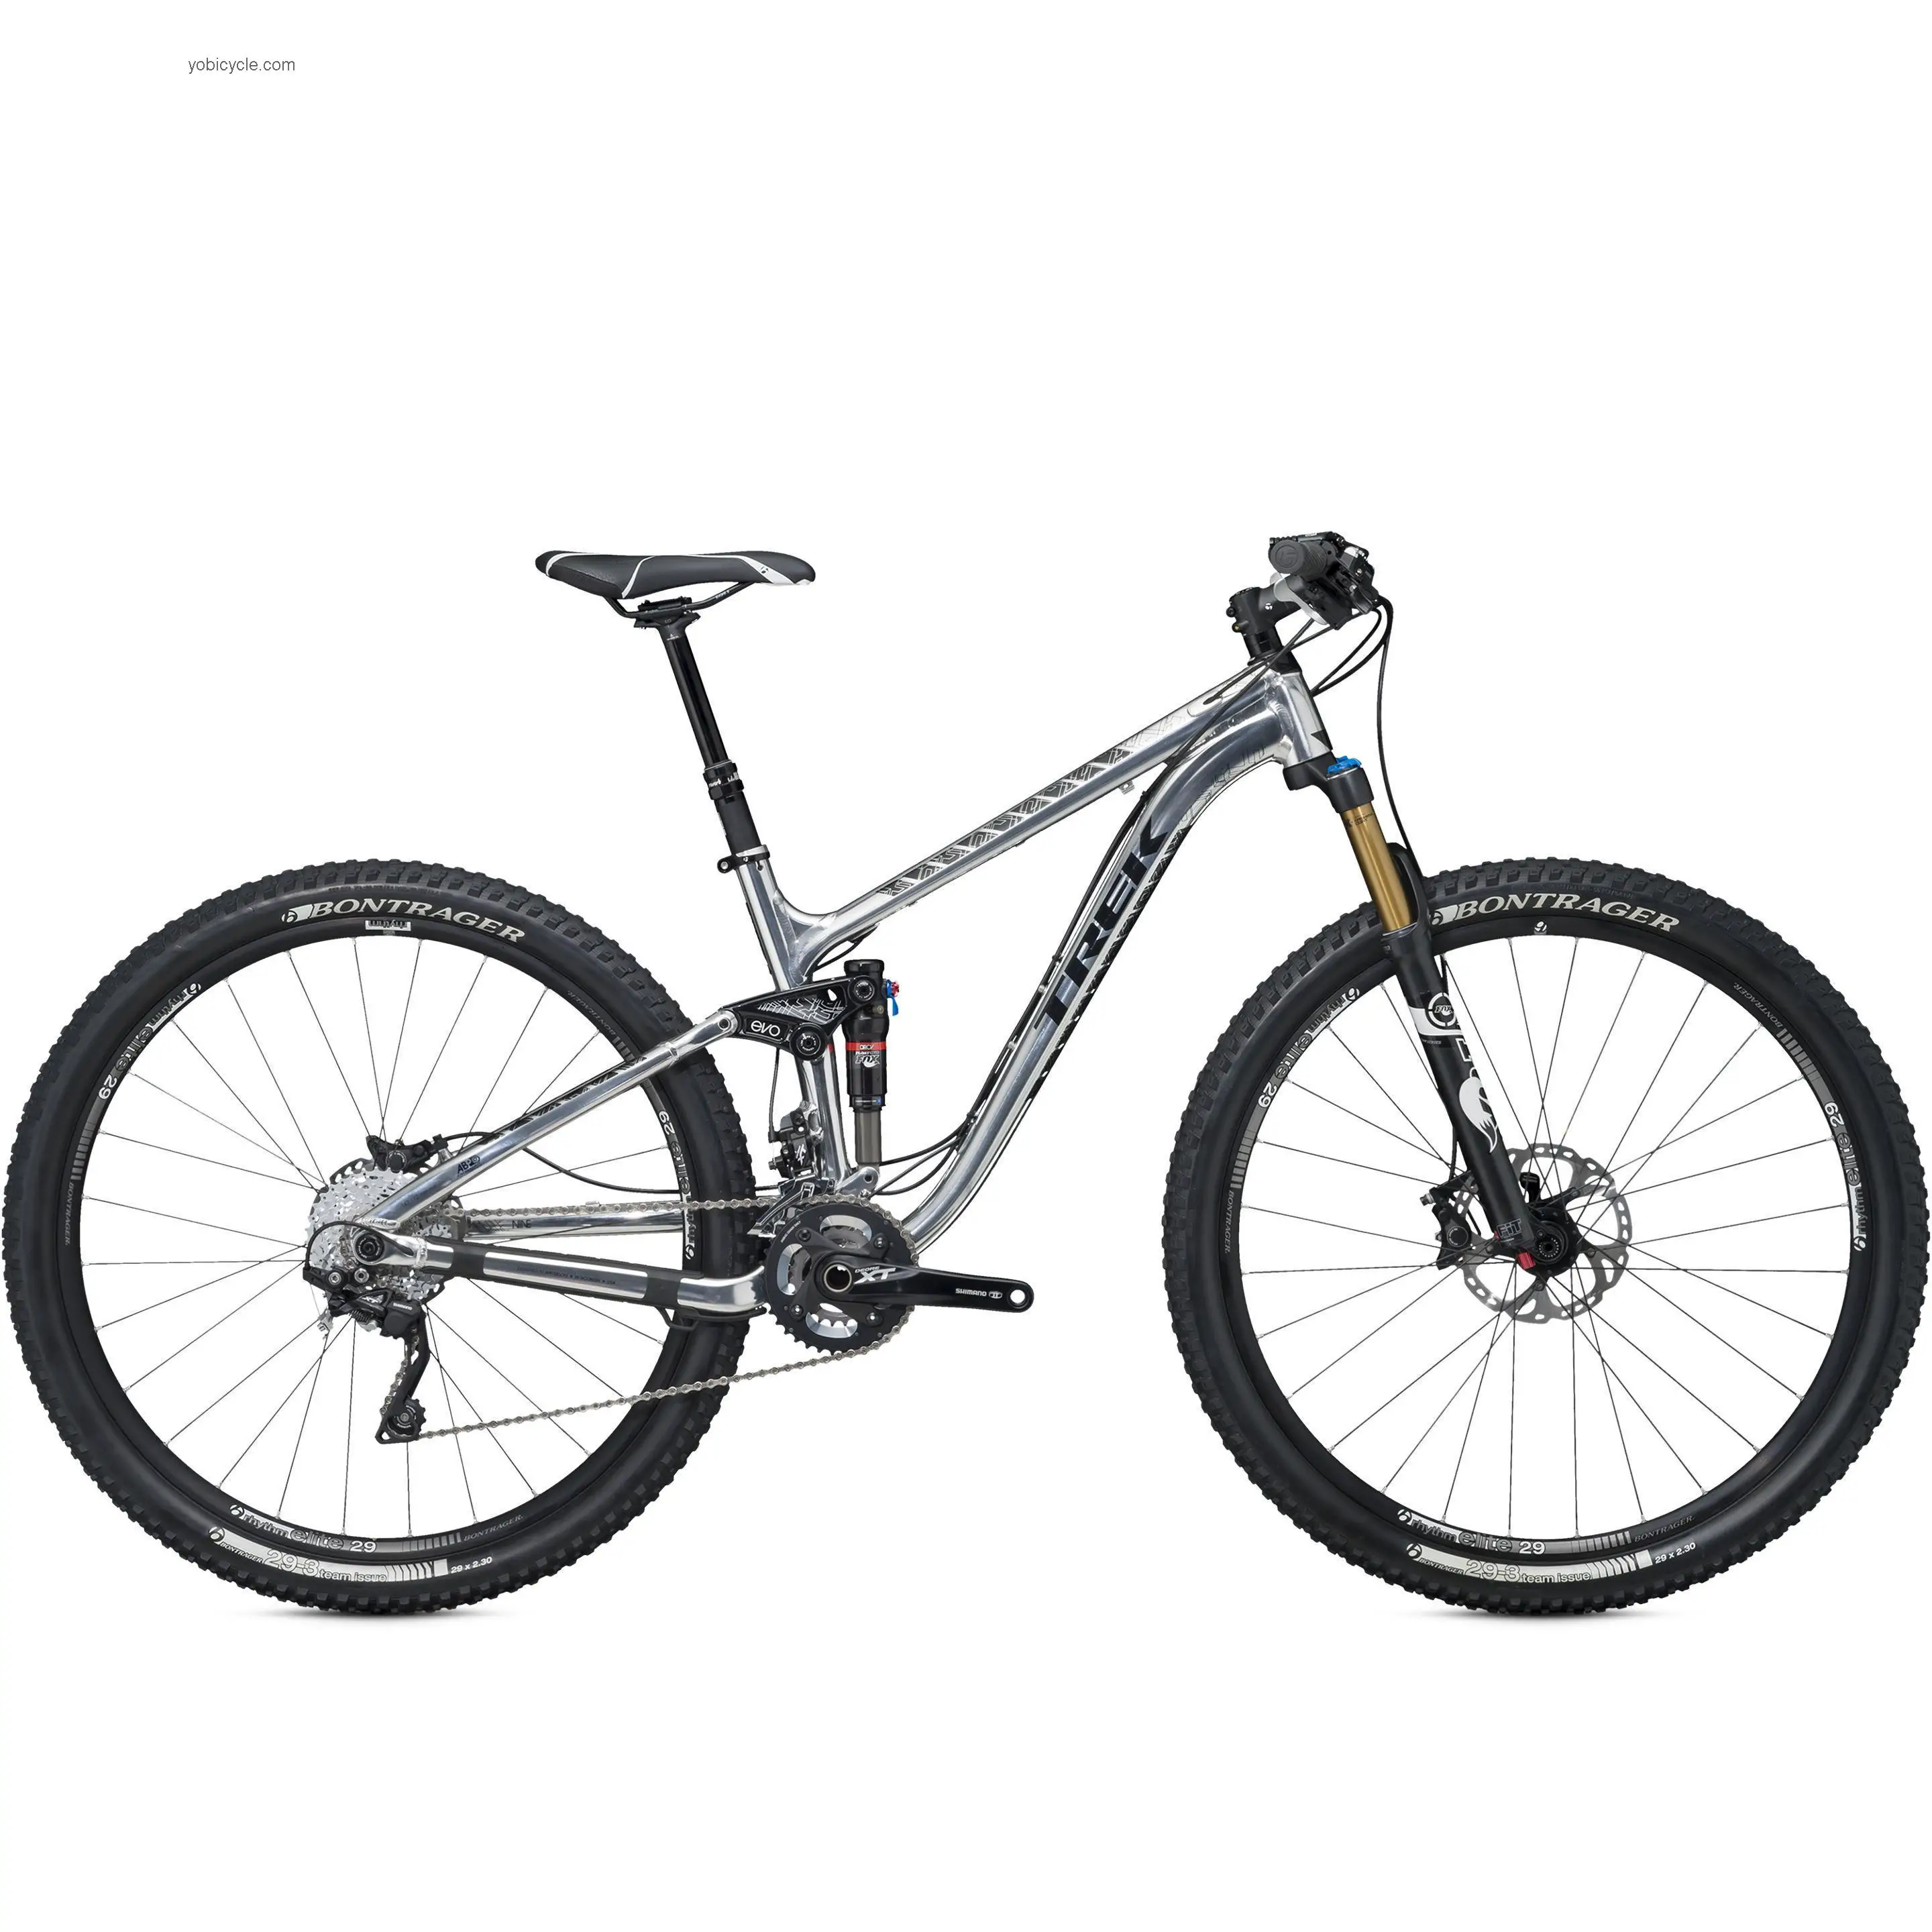 Trek Fuel EX 9 29 competitors and comparison tool online specs and performance